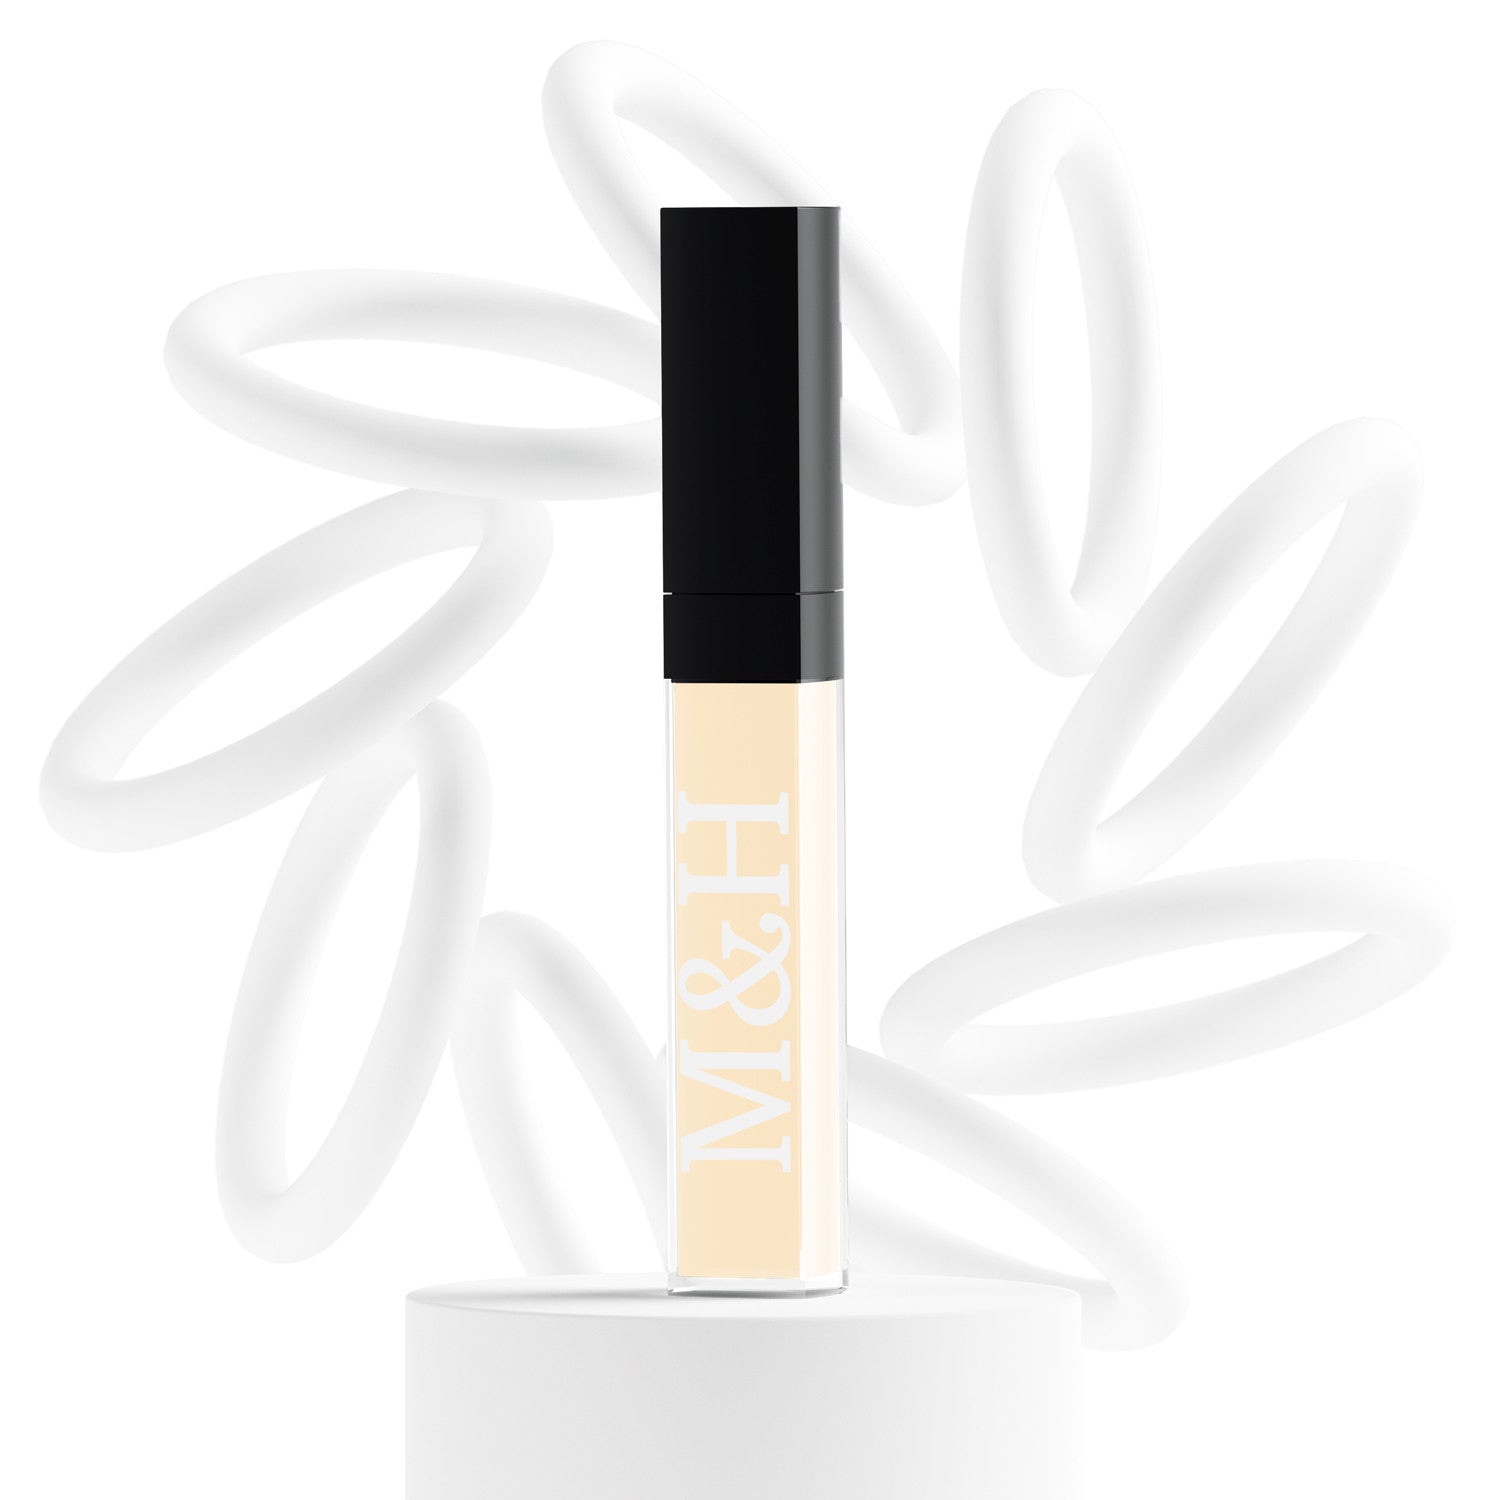 Vegan Concealers - M&H FashionVegan ConcealersconcealerM&H FashionM&H FashionConcealer-951IvoryVegan ConcealersM&H FashionconcealerM&H Fashion This multifunctional concealer is designed to cover under-eye circles, complexion alterations, and major imperfections like scars, hyperpigmentation, burns, and tatVegan Concealers